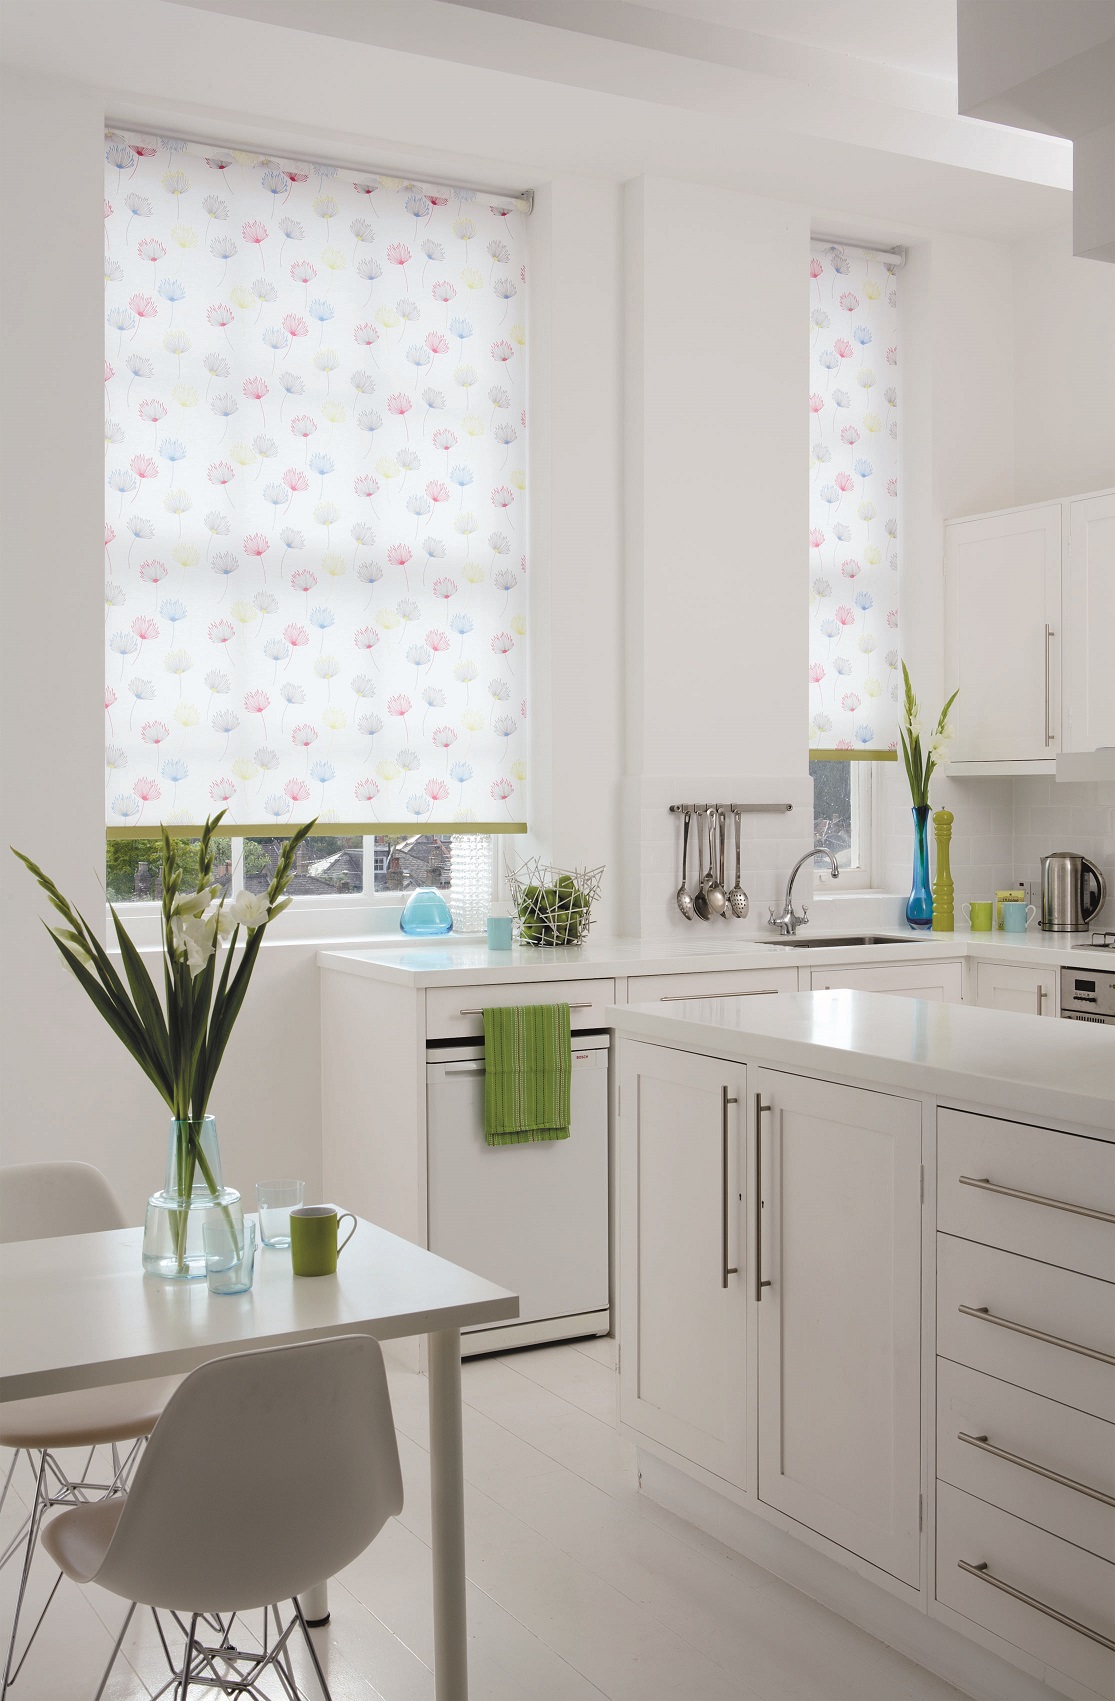 What Are The Best Blinds For A Small Room